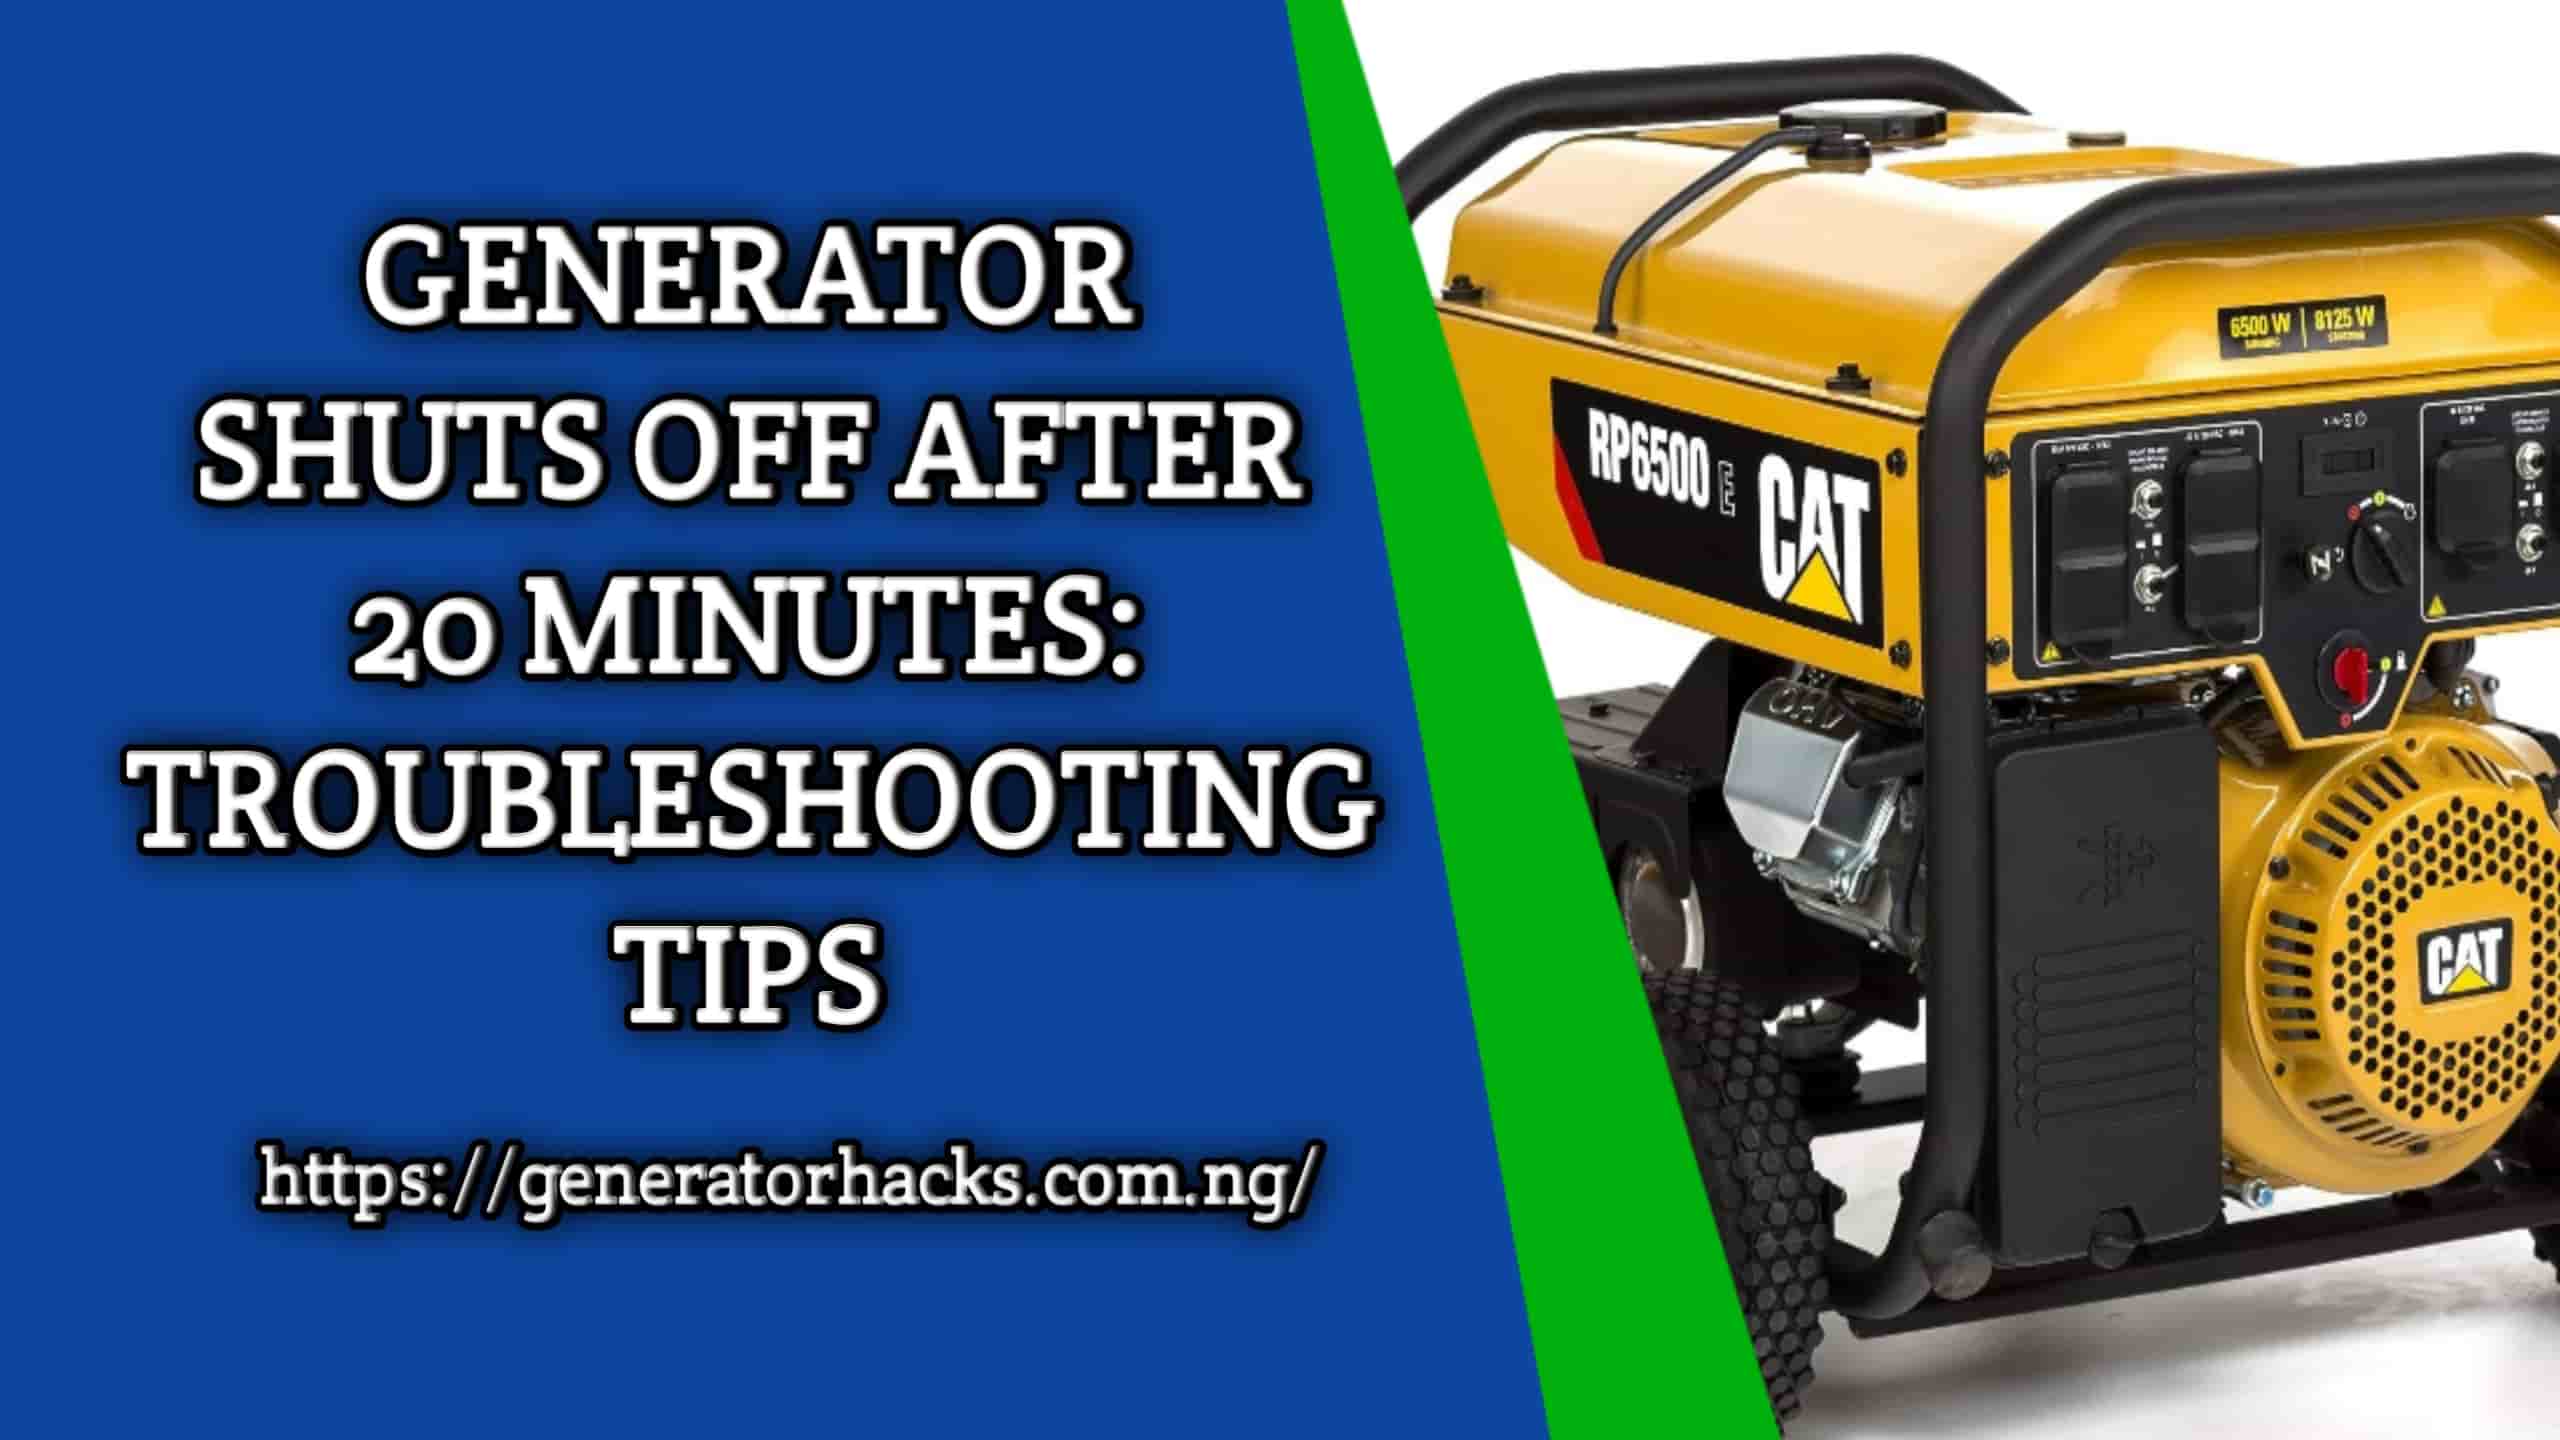 Generator Shuts Off After 20 Minutes: Troubleshooting Tips,